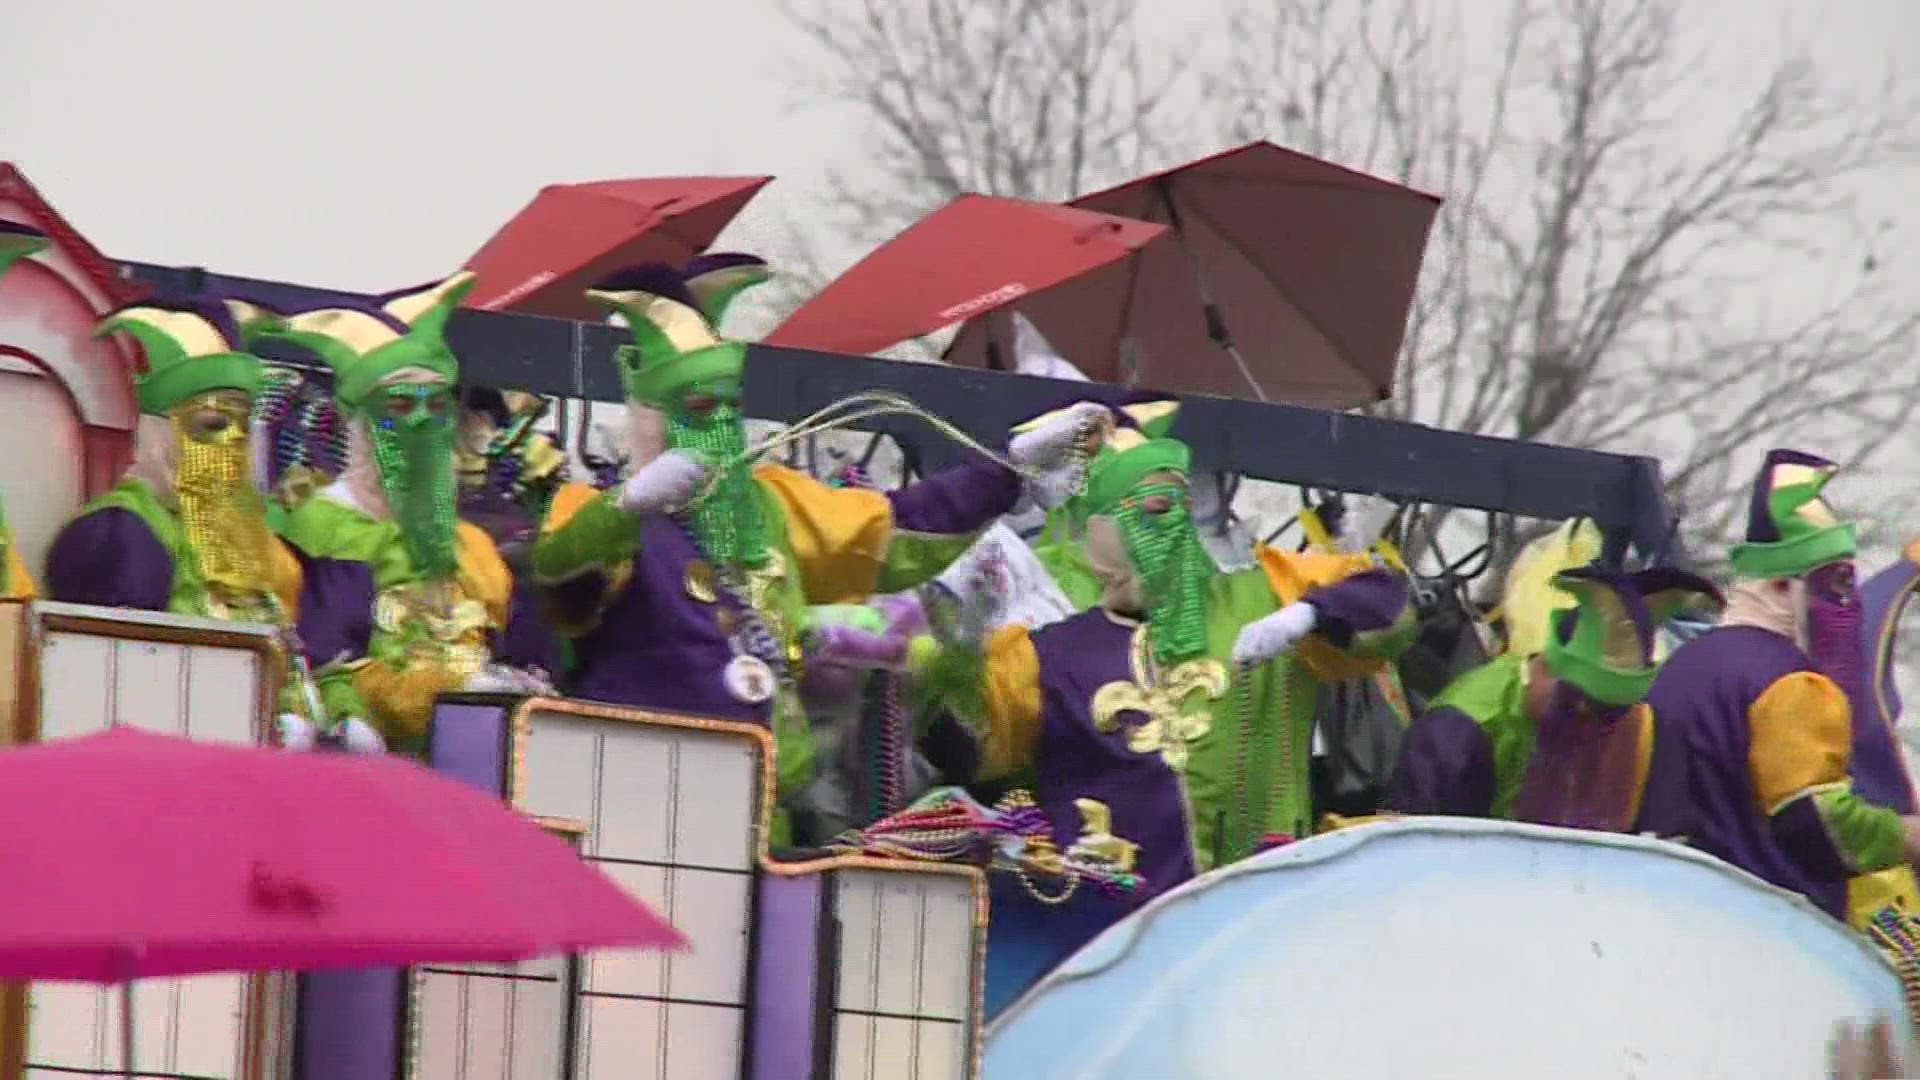 Mardi Gras captains are meeting with city officials Thursday to see where things stand on having Mardi Gras in 2022 and what it might look like if they do.